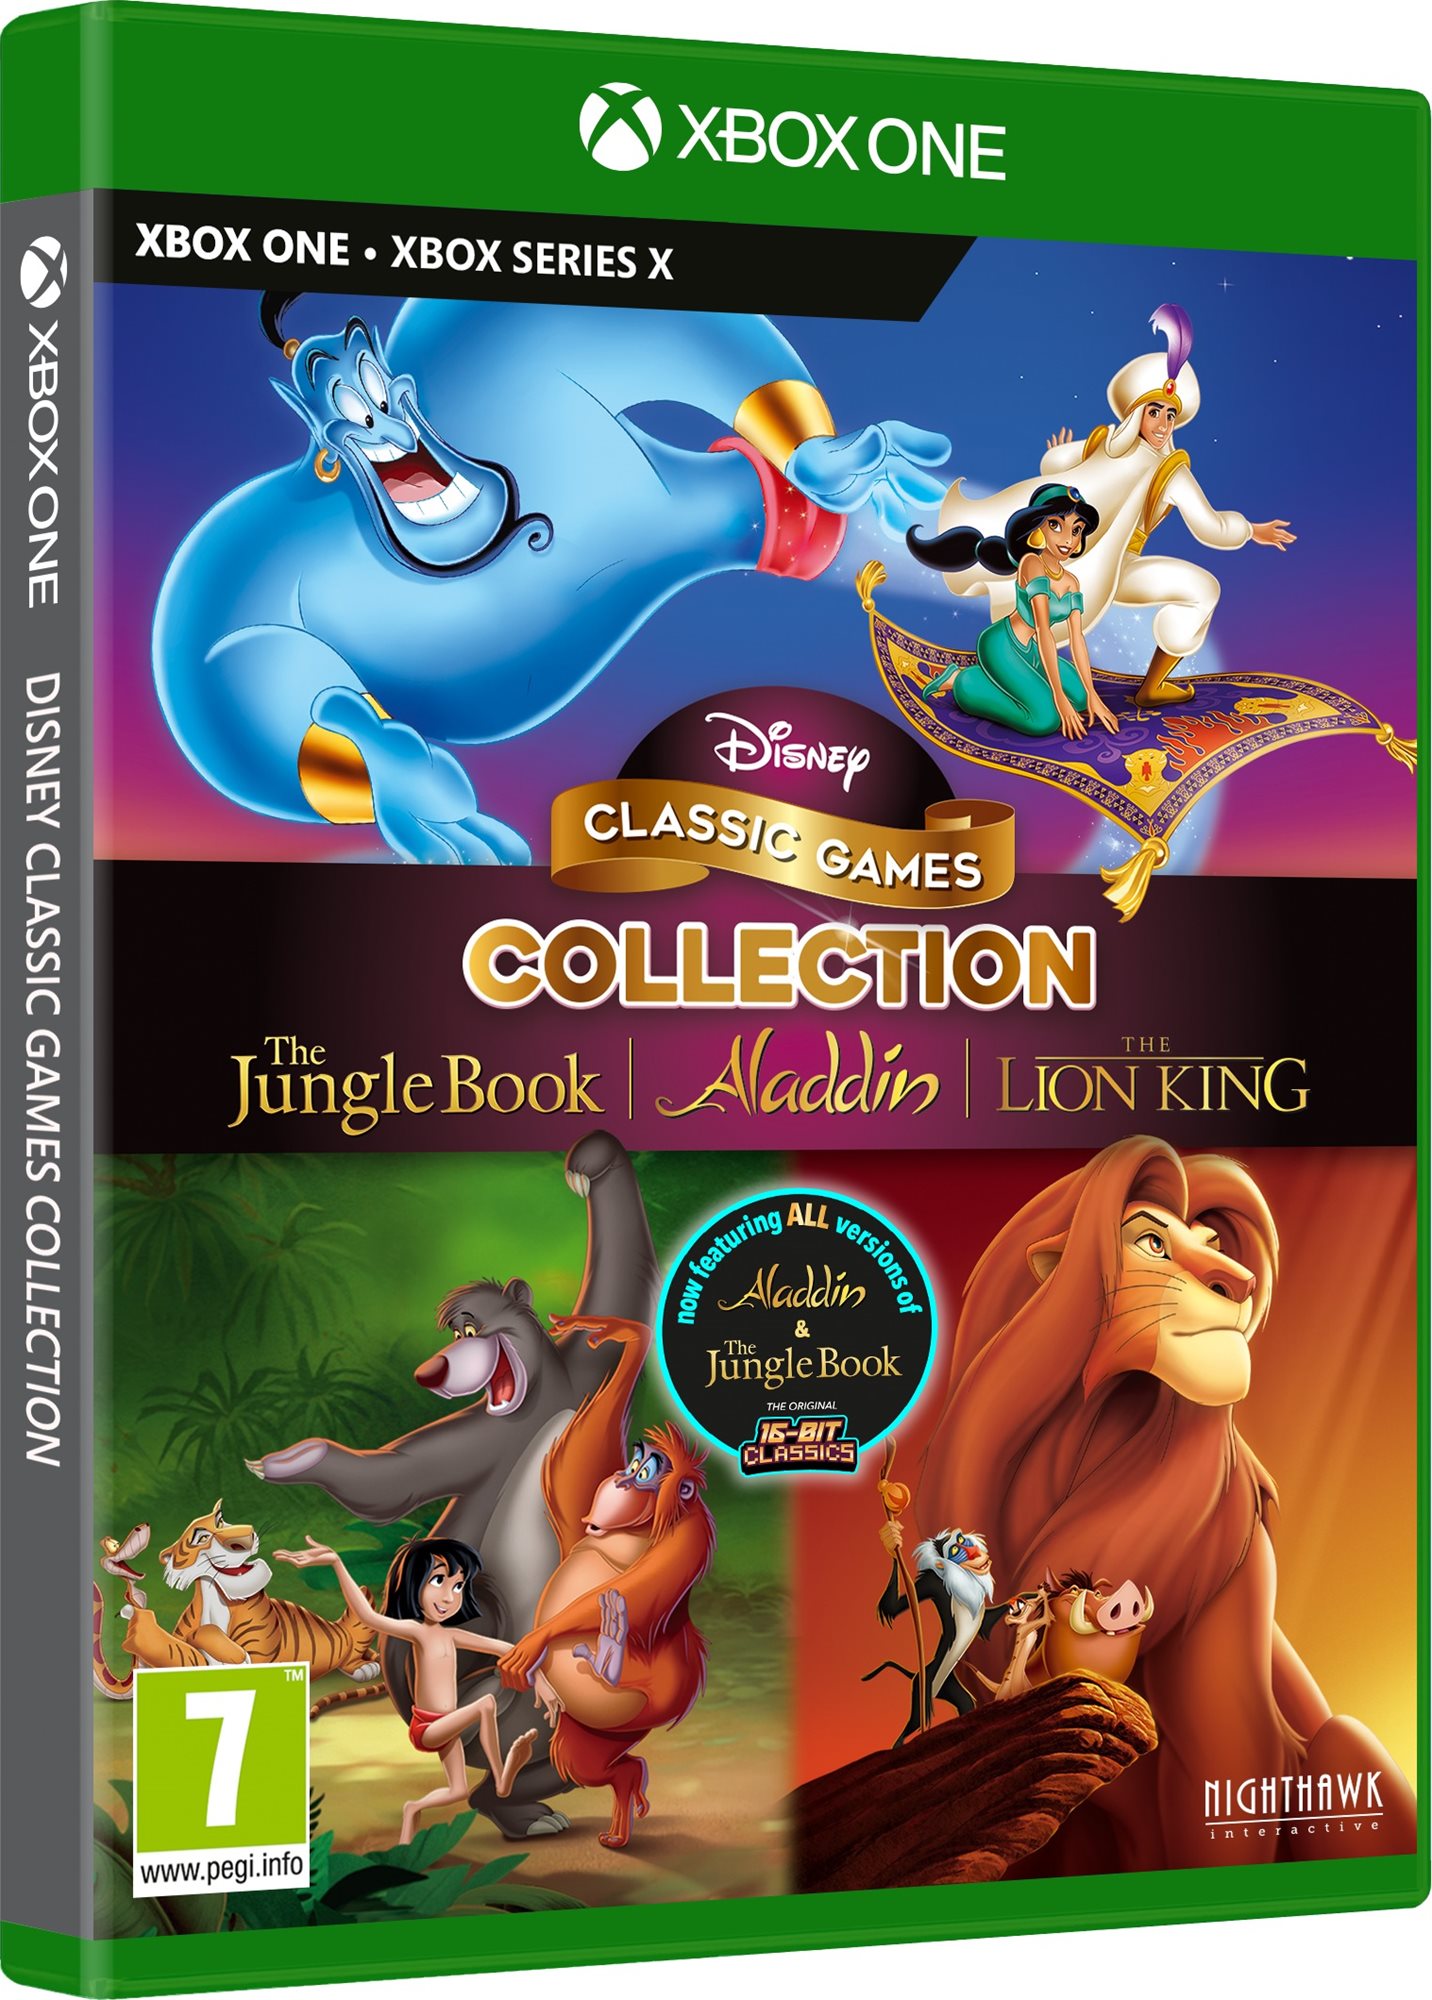 Disney Classic Games Collection: The Jungle Book, Aladdin & The Lion King - Xbox One